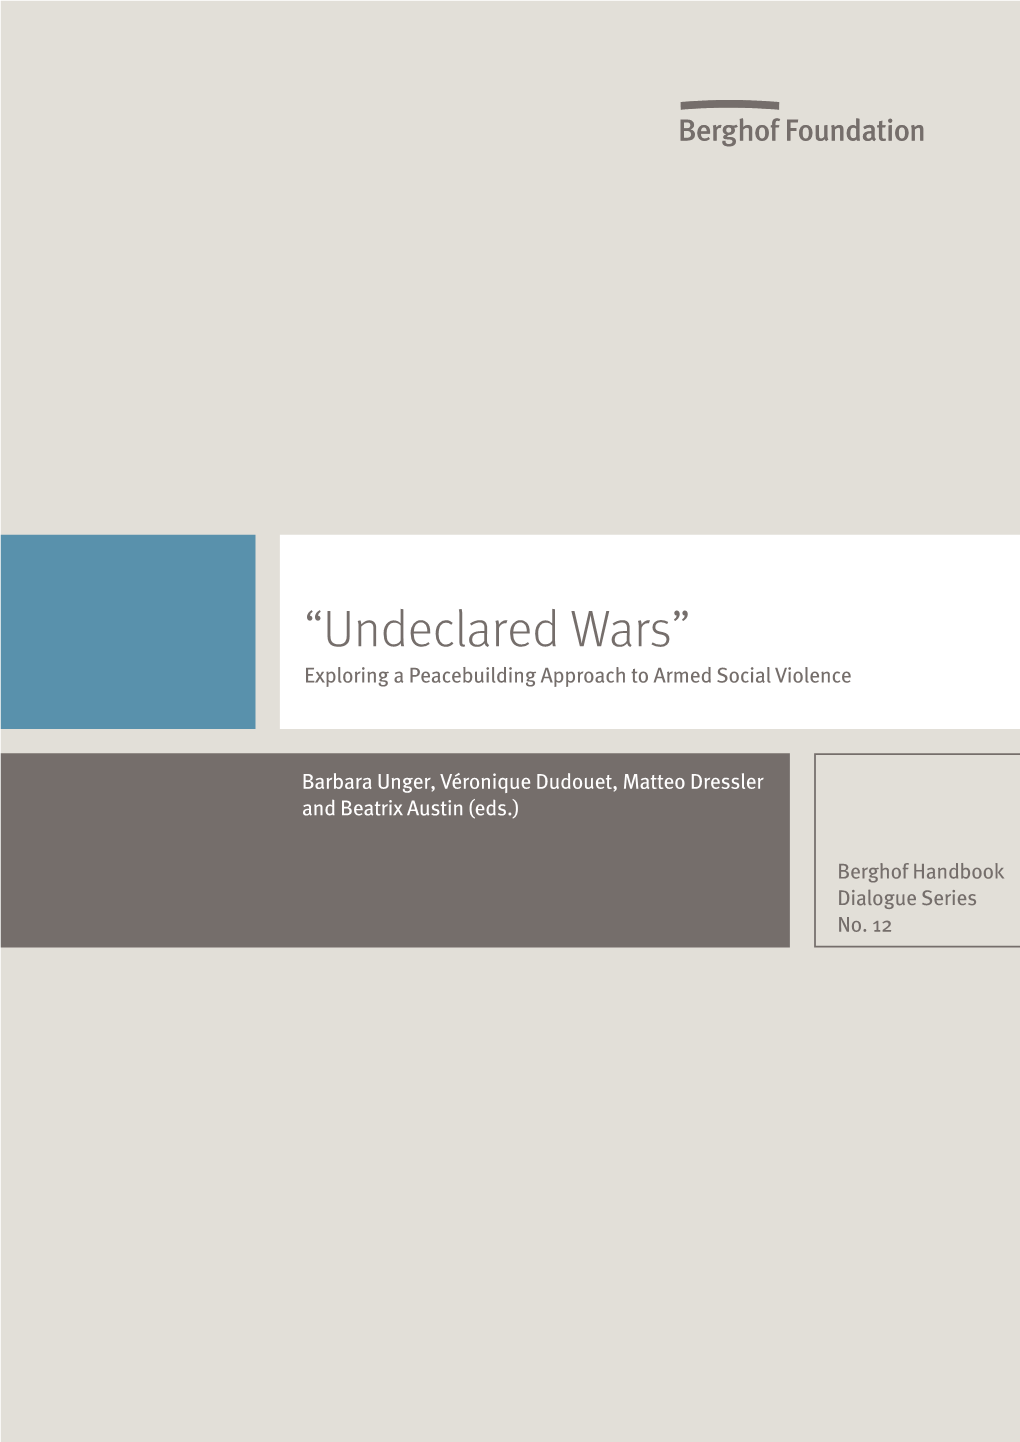 “Undeclared Wars”– Exploring a Peacebuilding Approach to Armed Social Violence